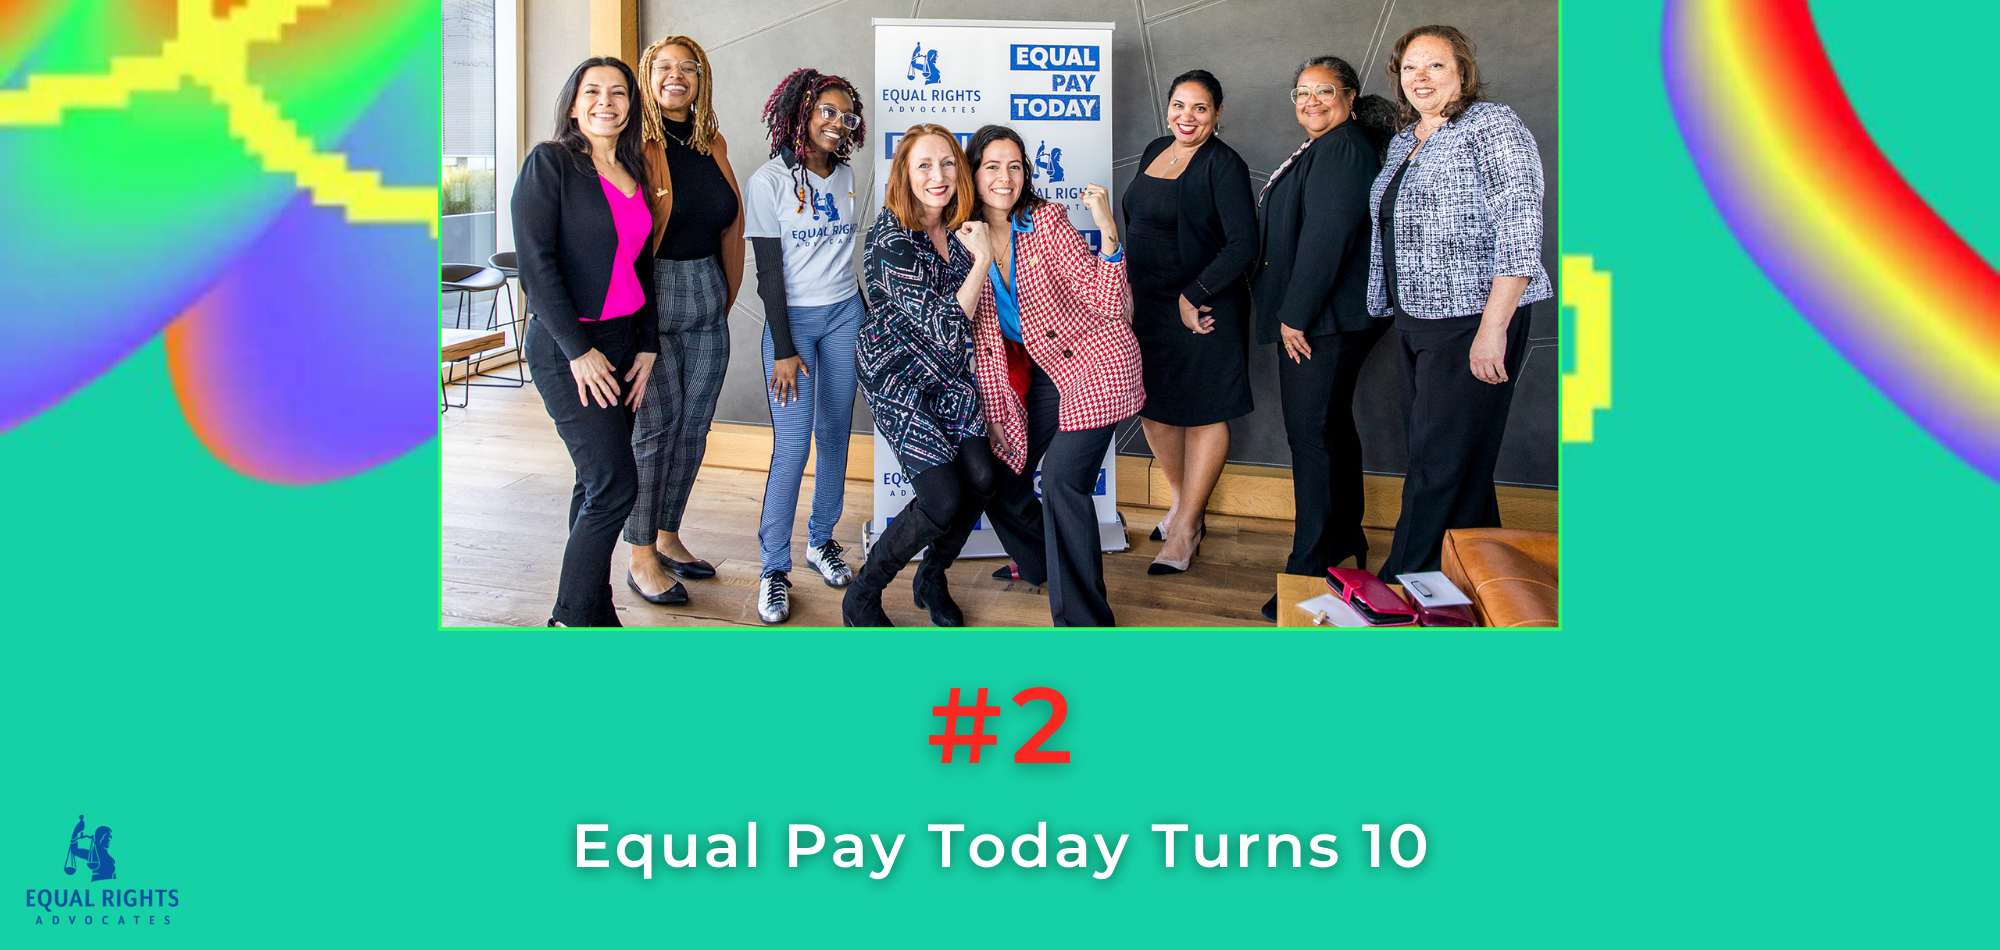 A mint green image with colorful swirls in the background. Photo at the top: a group of people smiling in front of an Equal Pay Today poster. Text at the bottom: #2 Equal Pay Today Turns 10